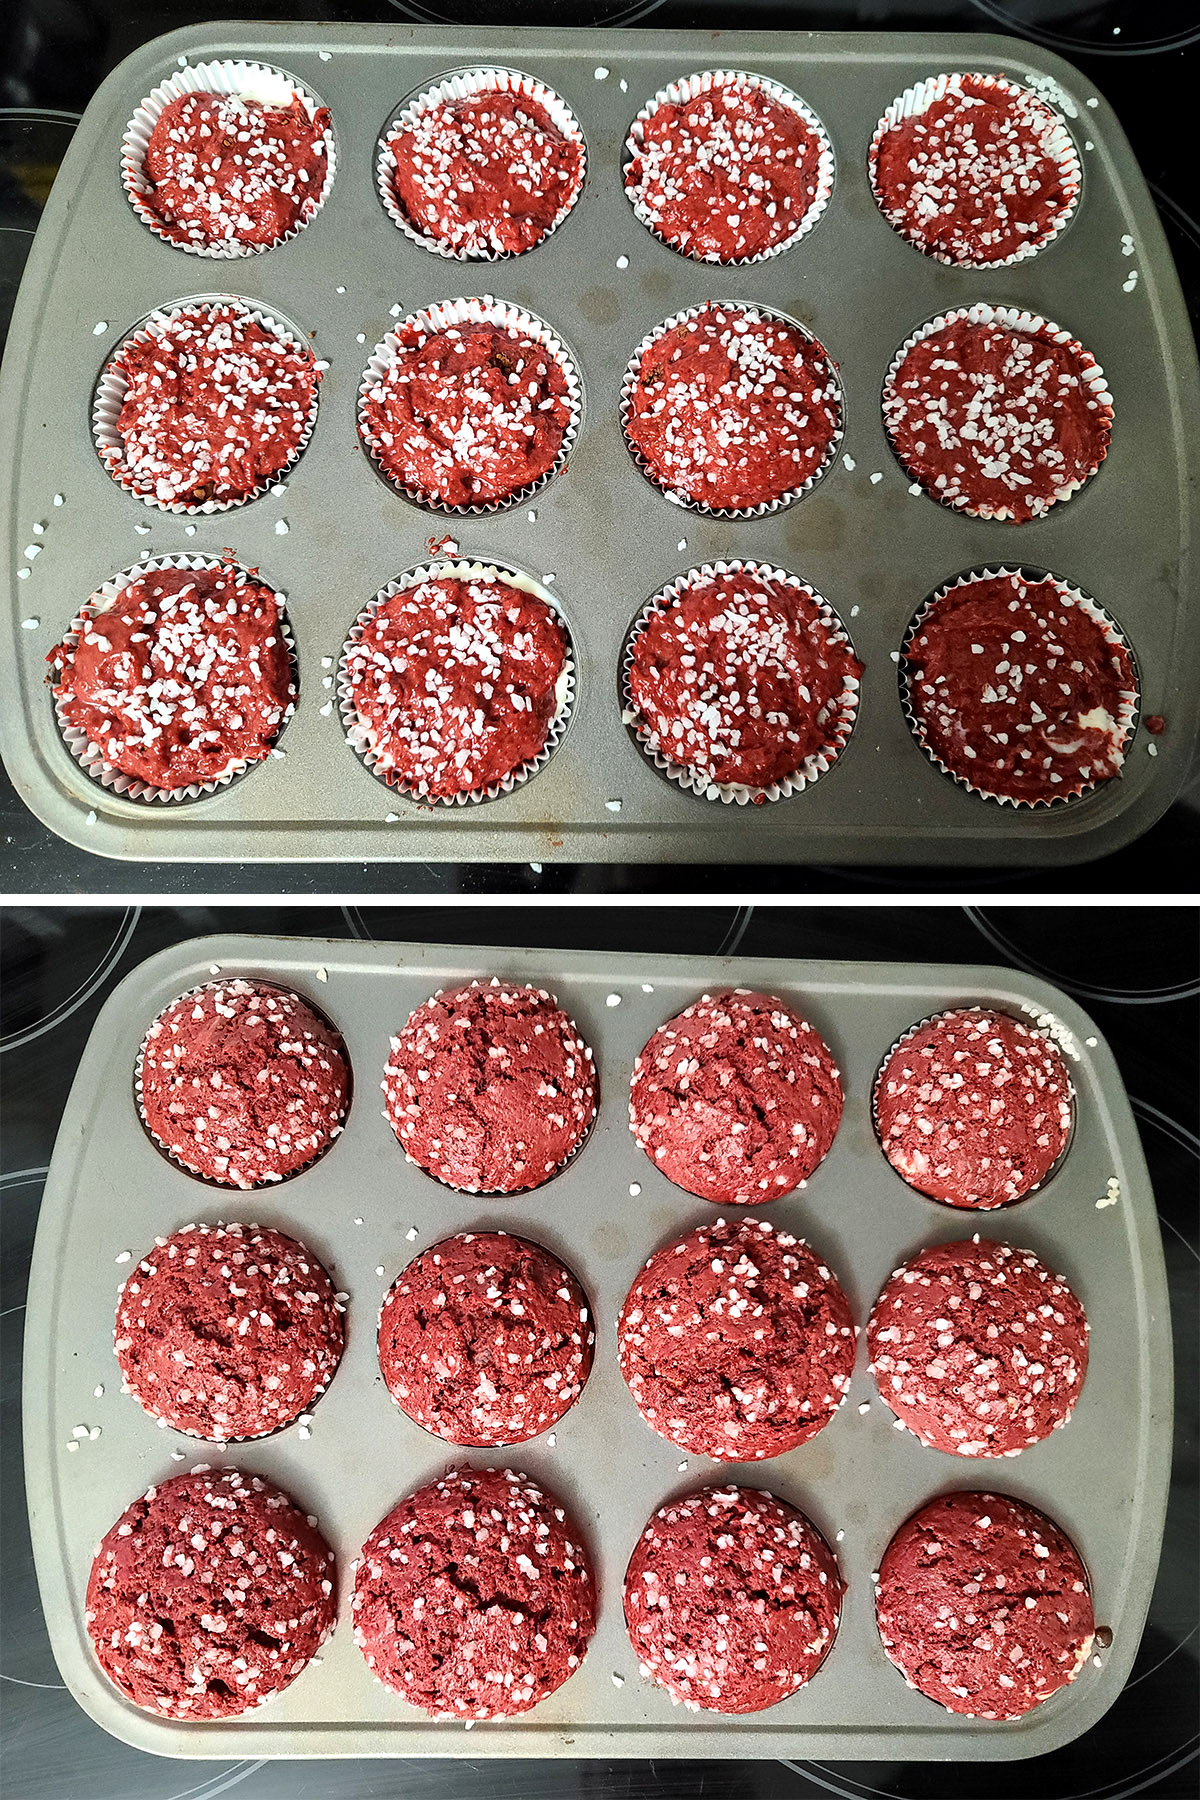 A 2 part image showing the sugar topped muffins before and after being baked.